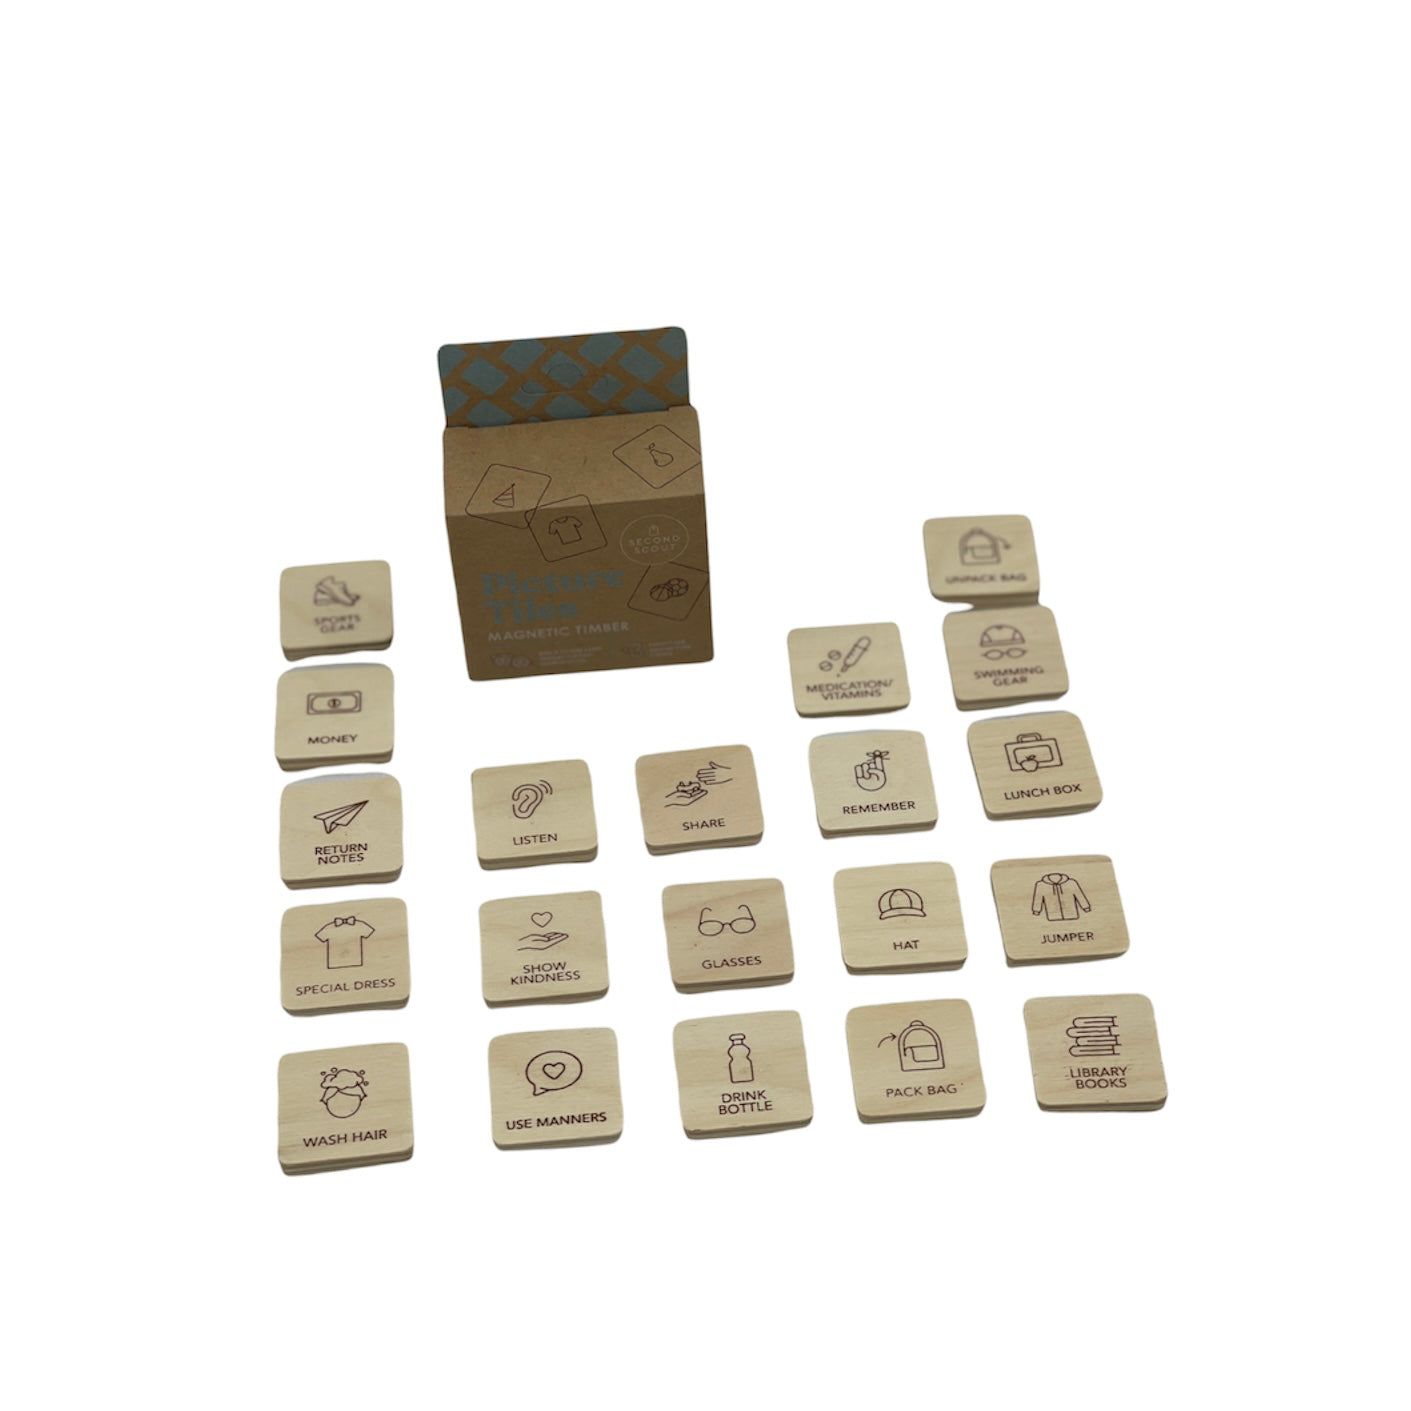 Second Scout Picture Tiles - Routine pack with tiles laid out in front of packaging box on white background